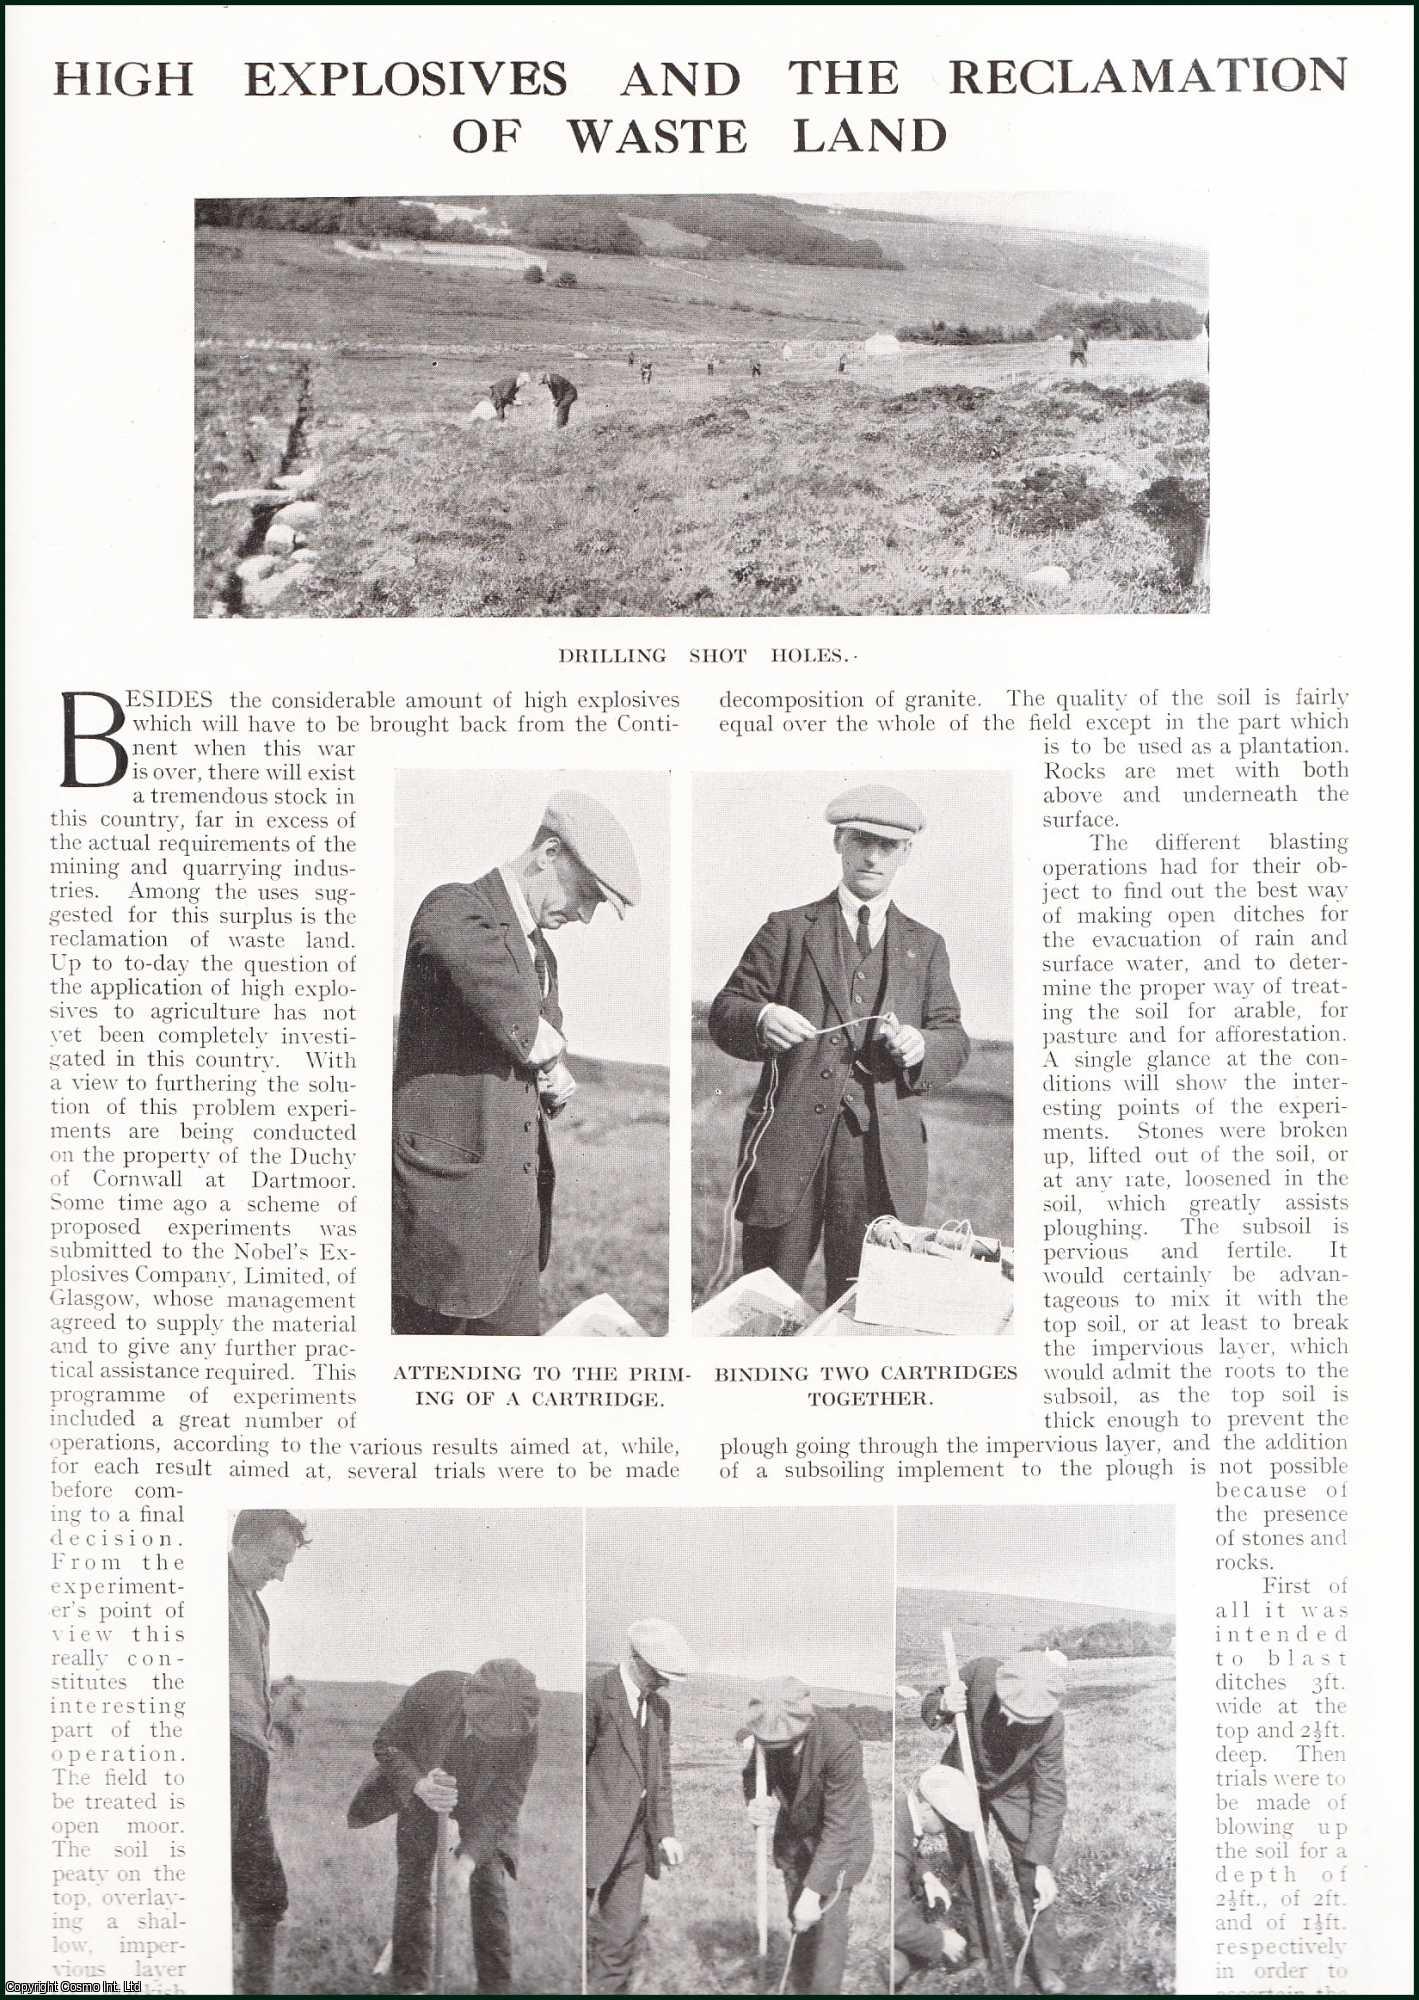 H. Vendelmans - High Explosives & the Reclamation of Waste Land, Duchy of Cornwall at Dartmoor. Several pictures and accompanying text, removed from an original issue of Country Life Magazine, 1917.